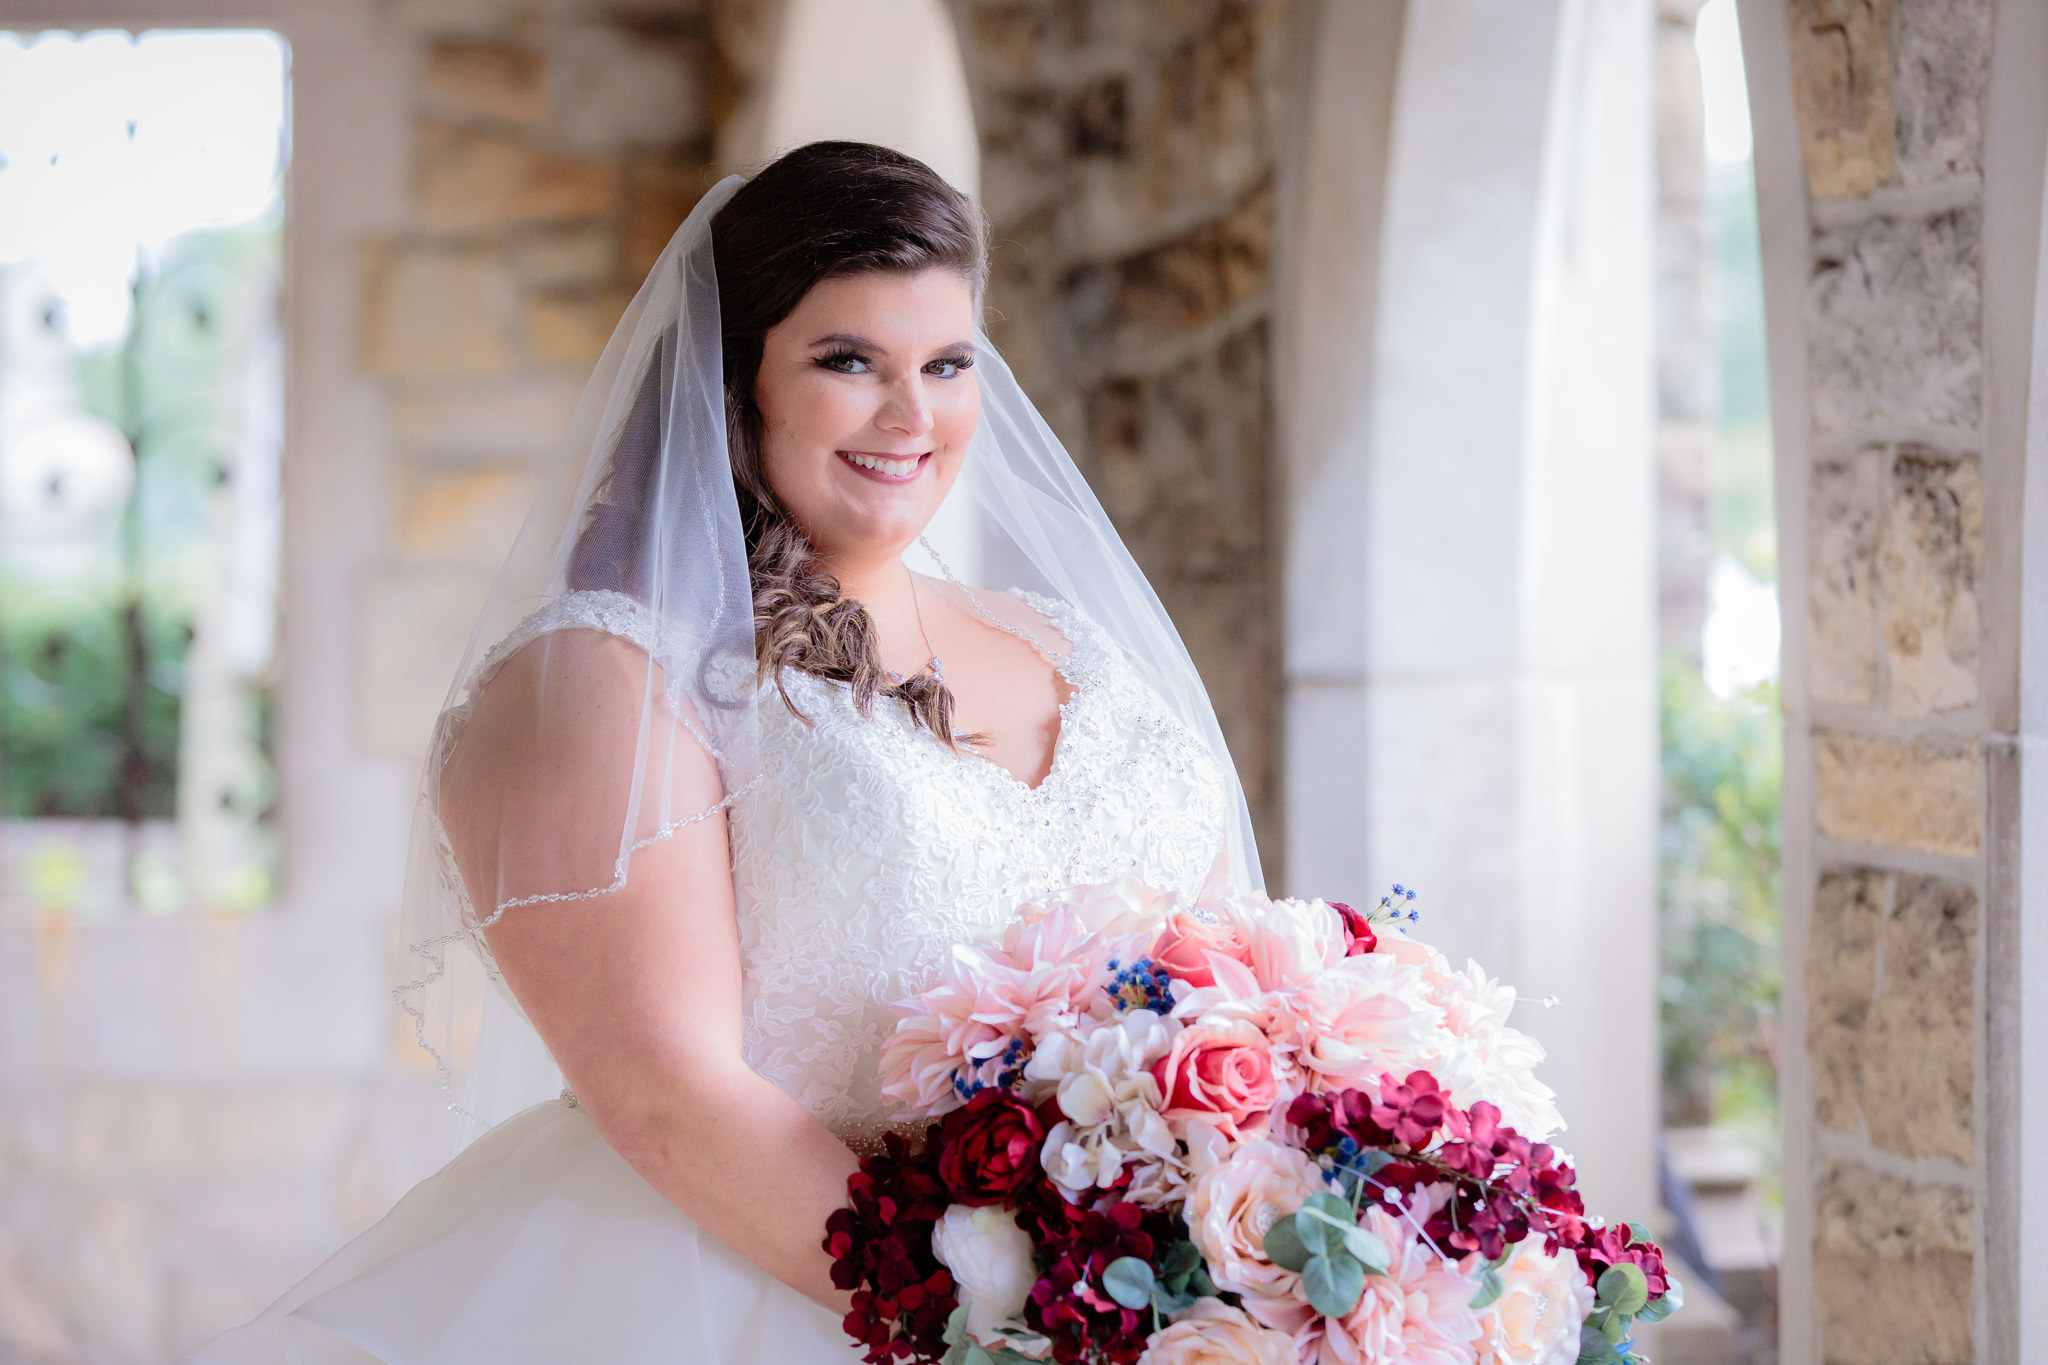 The bride outside of Mt. Lebanon United Methodist Church with her DIY artificial flowers